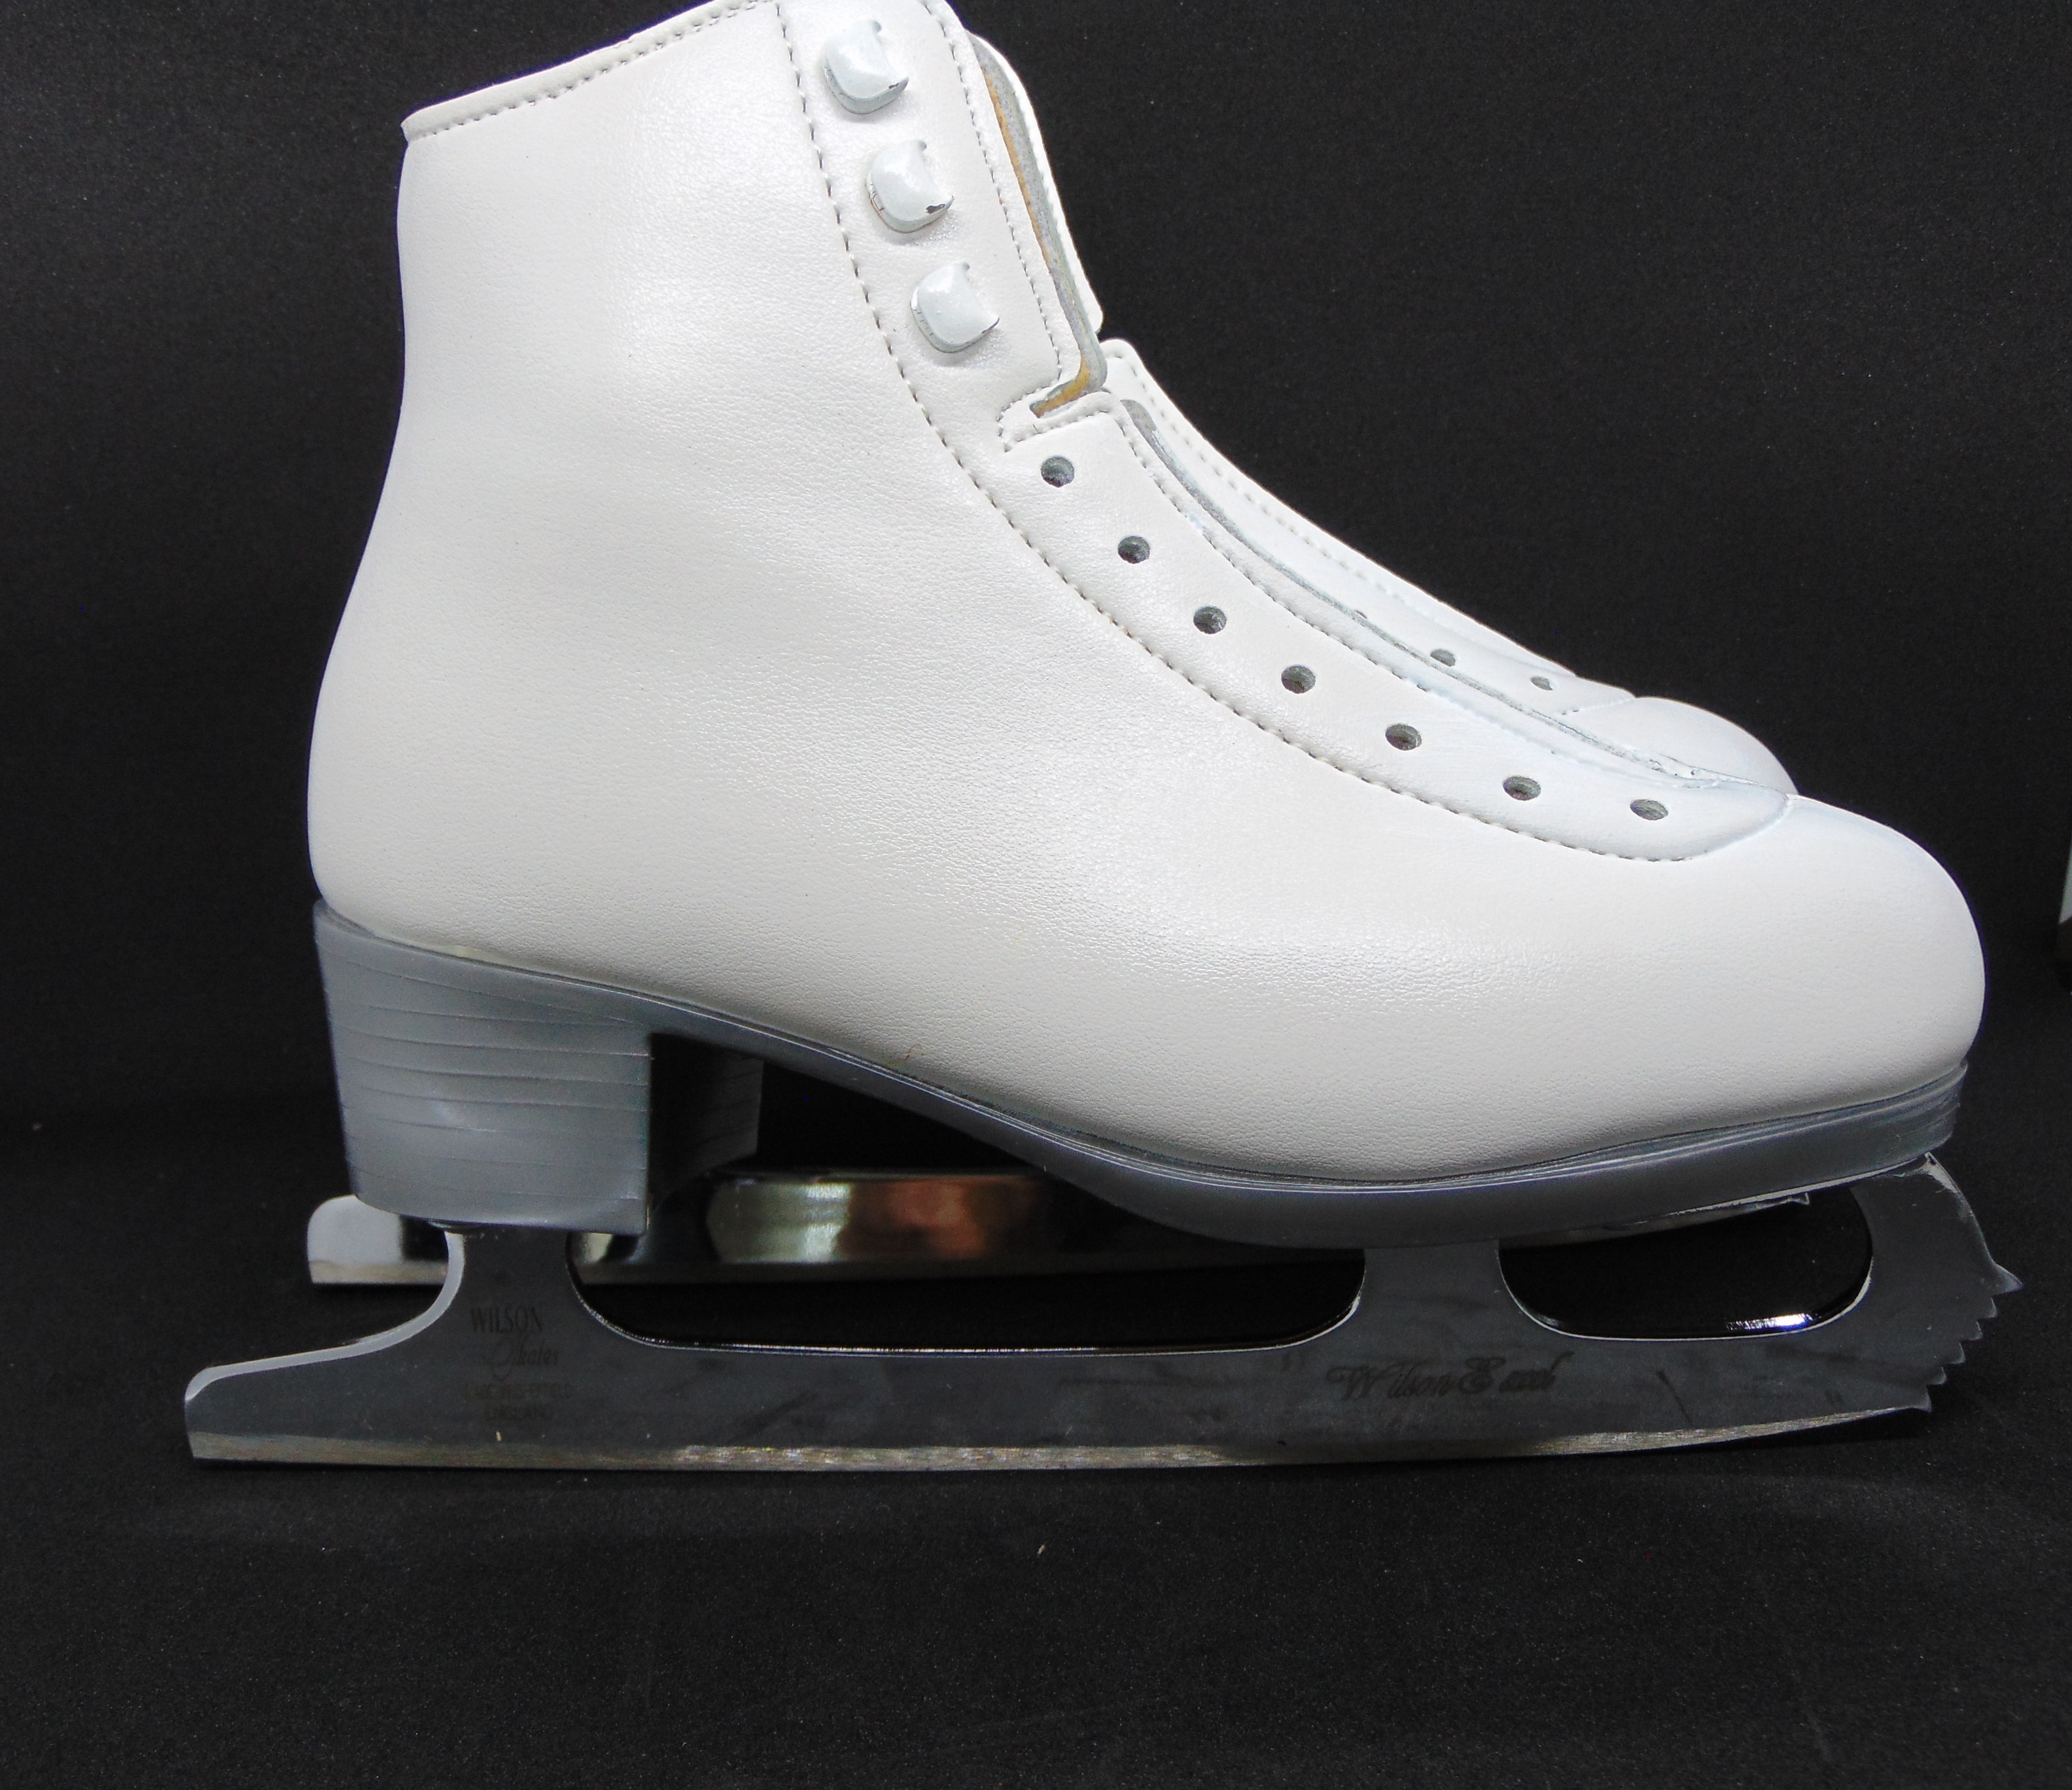 Belati Italian Leather Figure Ice Skates white( No Laces) was 70.00 now only £34.99